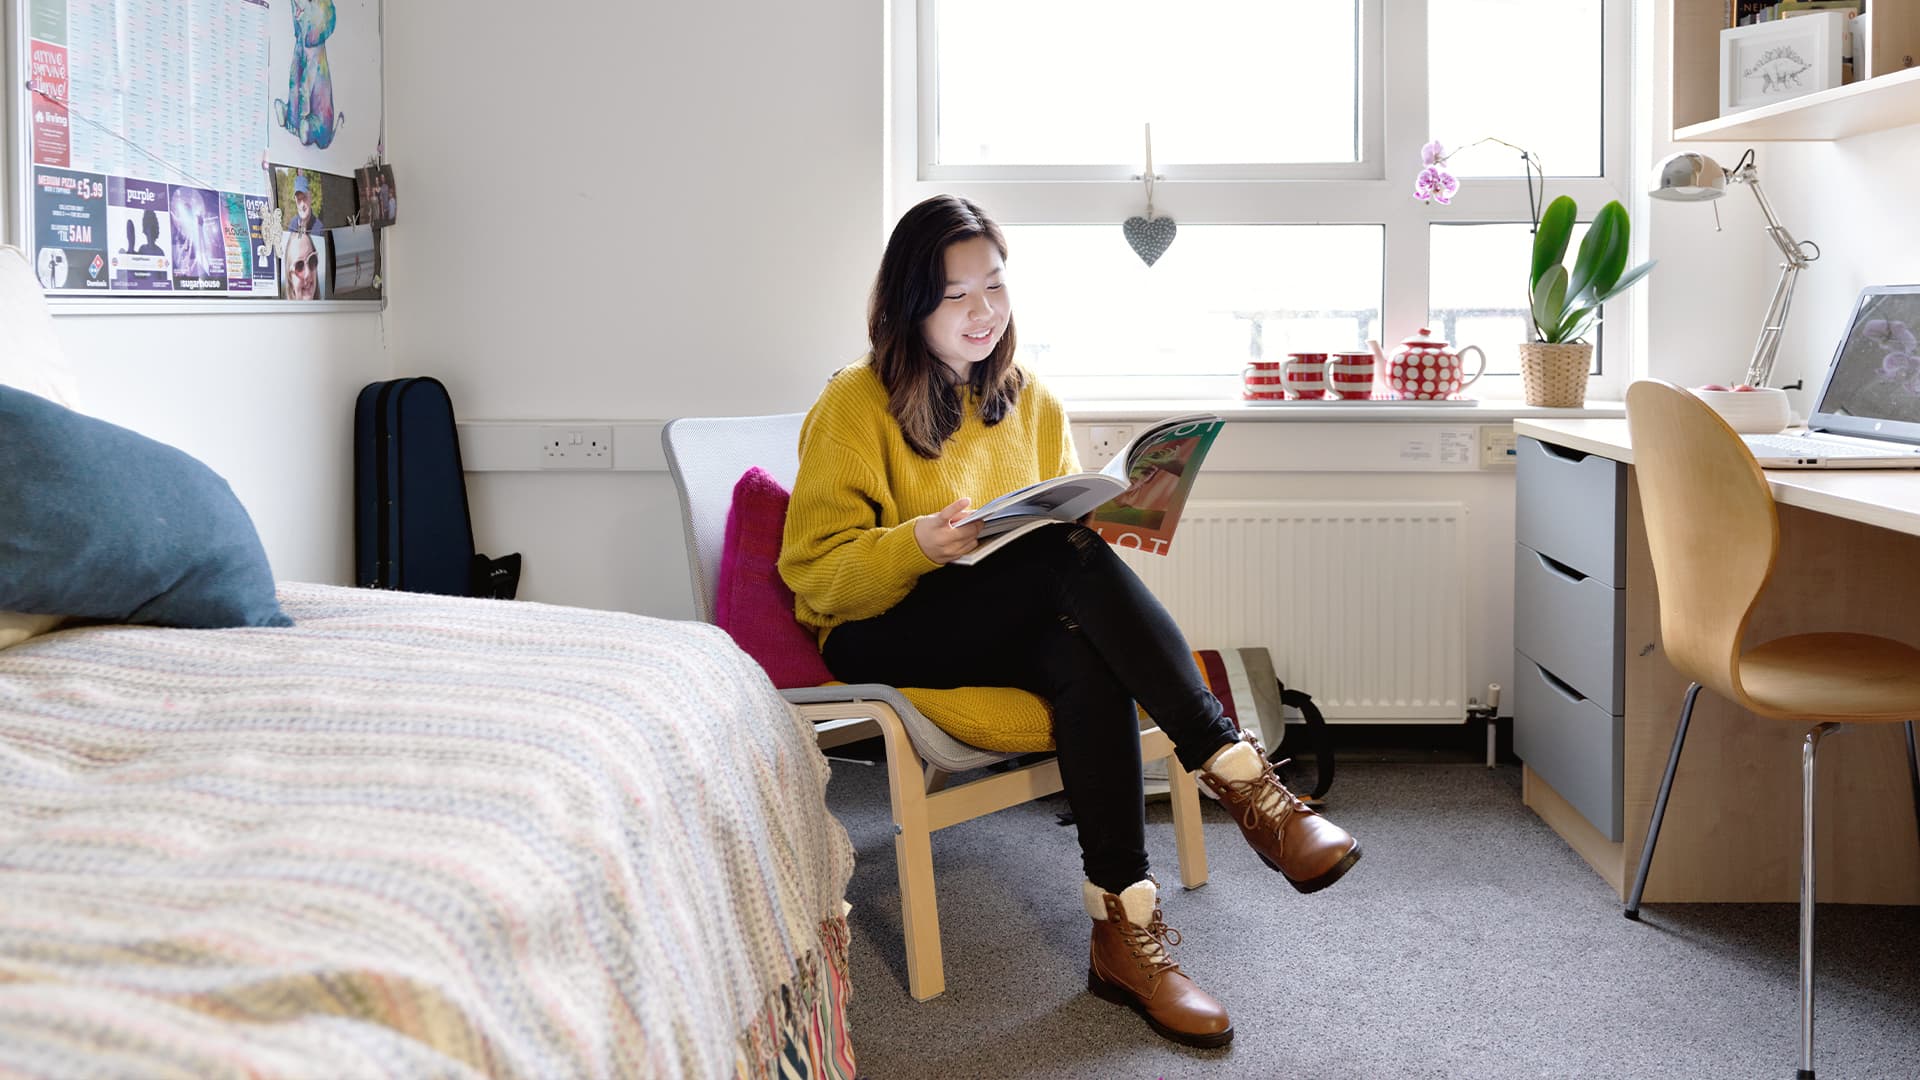 A student reads a book in their accommodation